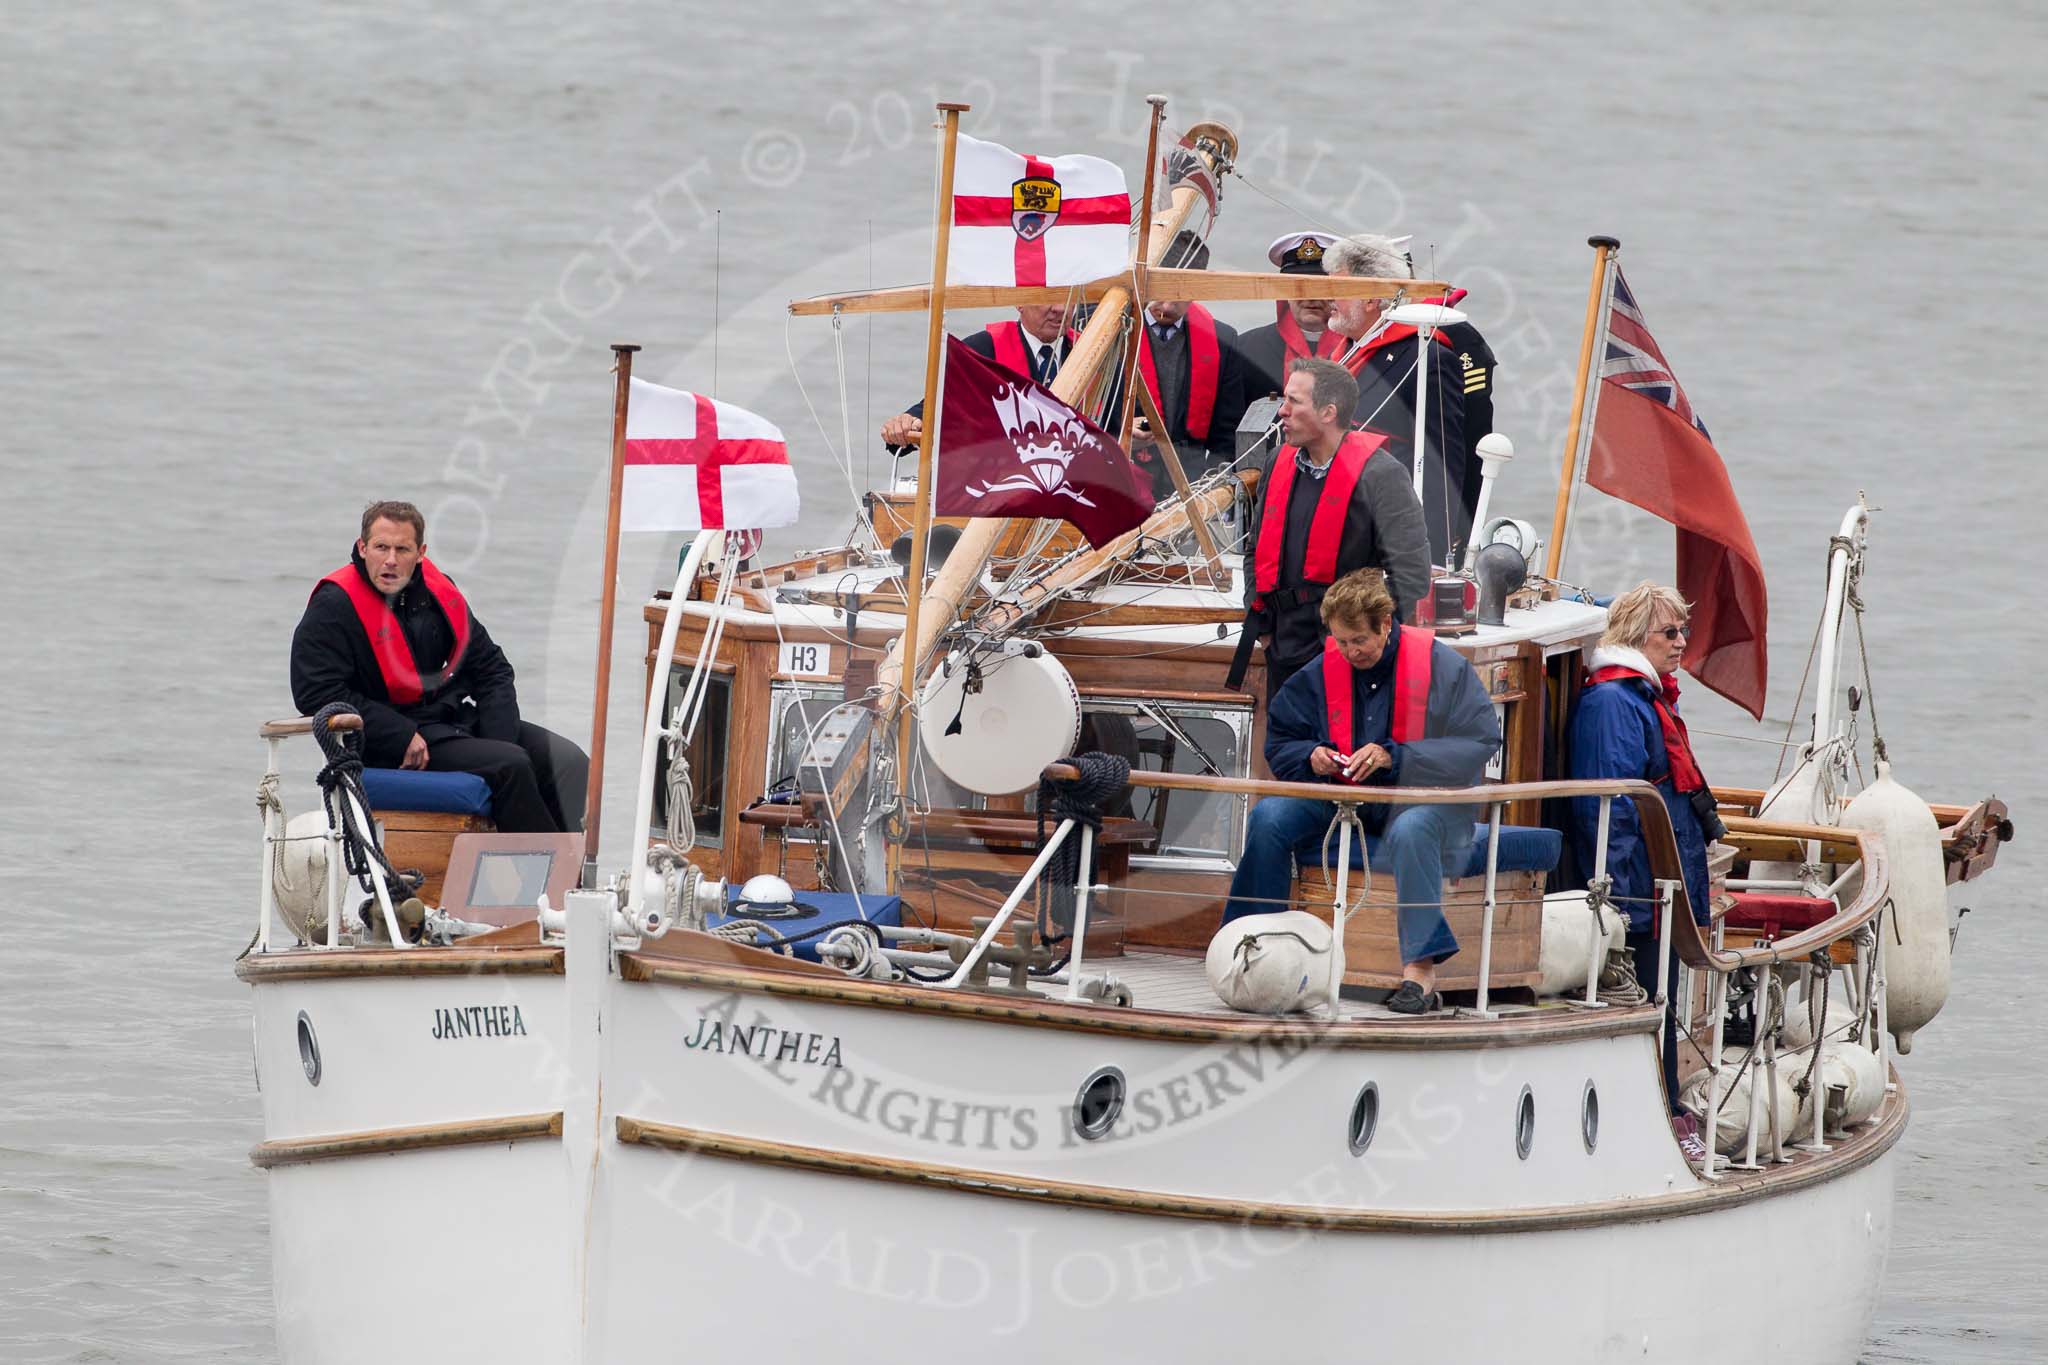 Thames Diamond Jubilee Pageant: DUNKIRK LITTLE SHIPS-Janthea (H3)..
River Thames seen from Battersea Bridge,
London,

United Kingdom,
on 03 June 2012 at 15:11, image #266